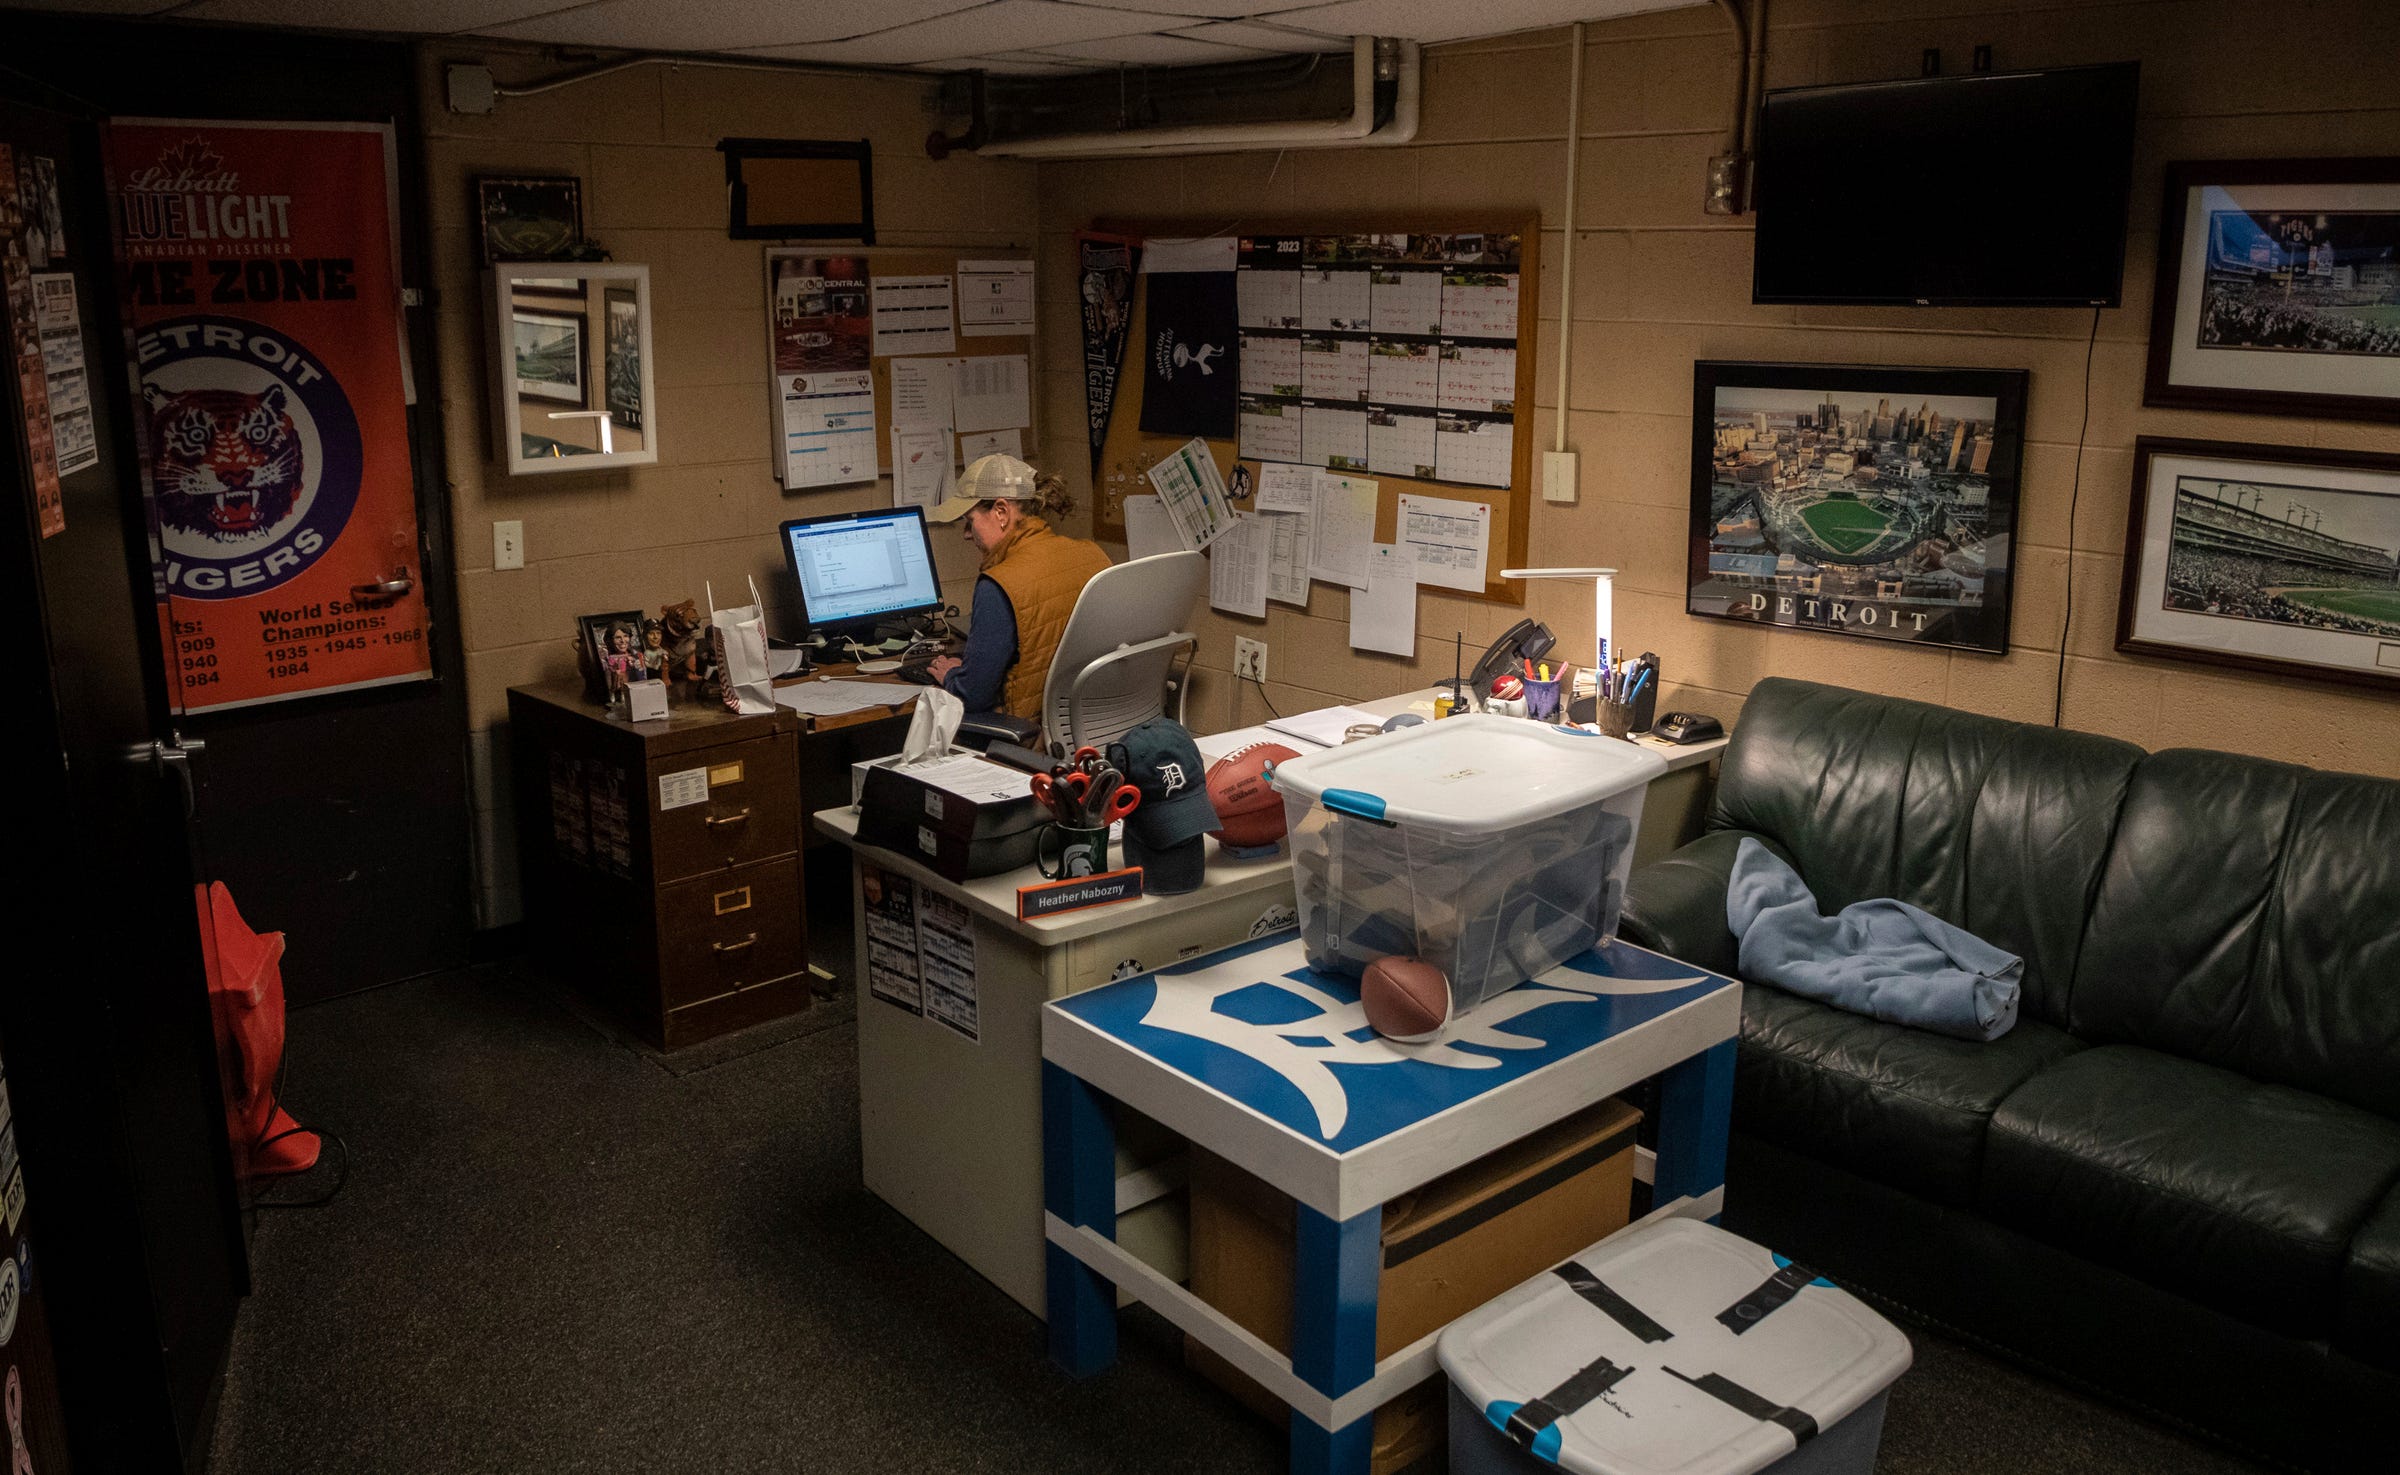 Heather Nabozny, the head groundkeeper for the Detroit Tigers, sits in her office during the Detroit Tigers' Opening Day at Comerica Park in Detroit on Thursday, April 6, 2023.